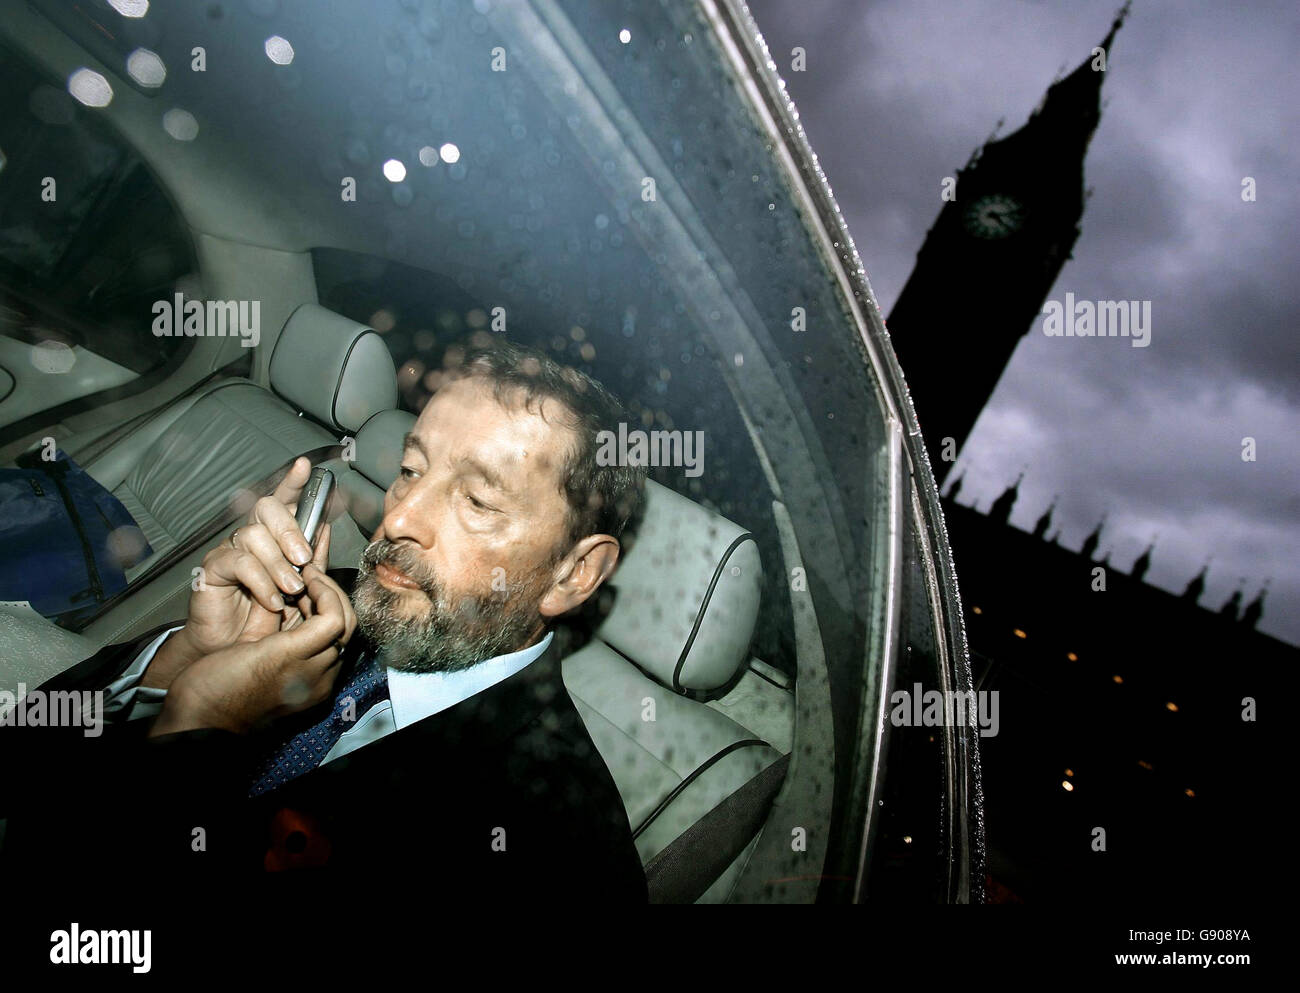 David Blunkett leaving the House of Commons. David Blunkett is contemplating the end of his Cabinet career today after being forced out for a second time. Mr Blunkett departed as Work and Pensions Secretary yesterday, saying he was paying the price for a simple mistake in his business dealings. Cabinet colleague John Hutton stepped into his shoes, switching from the role of Chancellor of the Duchy of Lancaster. The exit of Tony Blair's close ally came less than a year after he was forced to quit the Cabinet over the Kimberly Quinn affair. Stock Photo